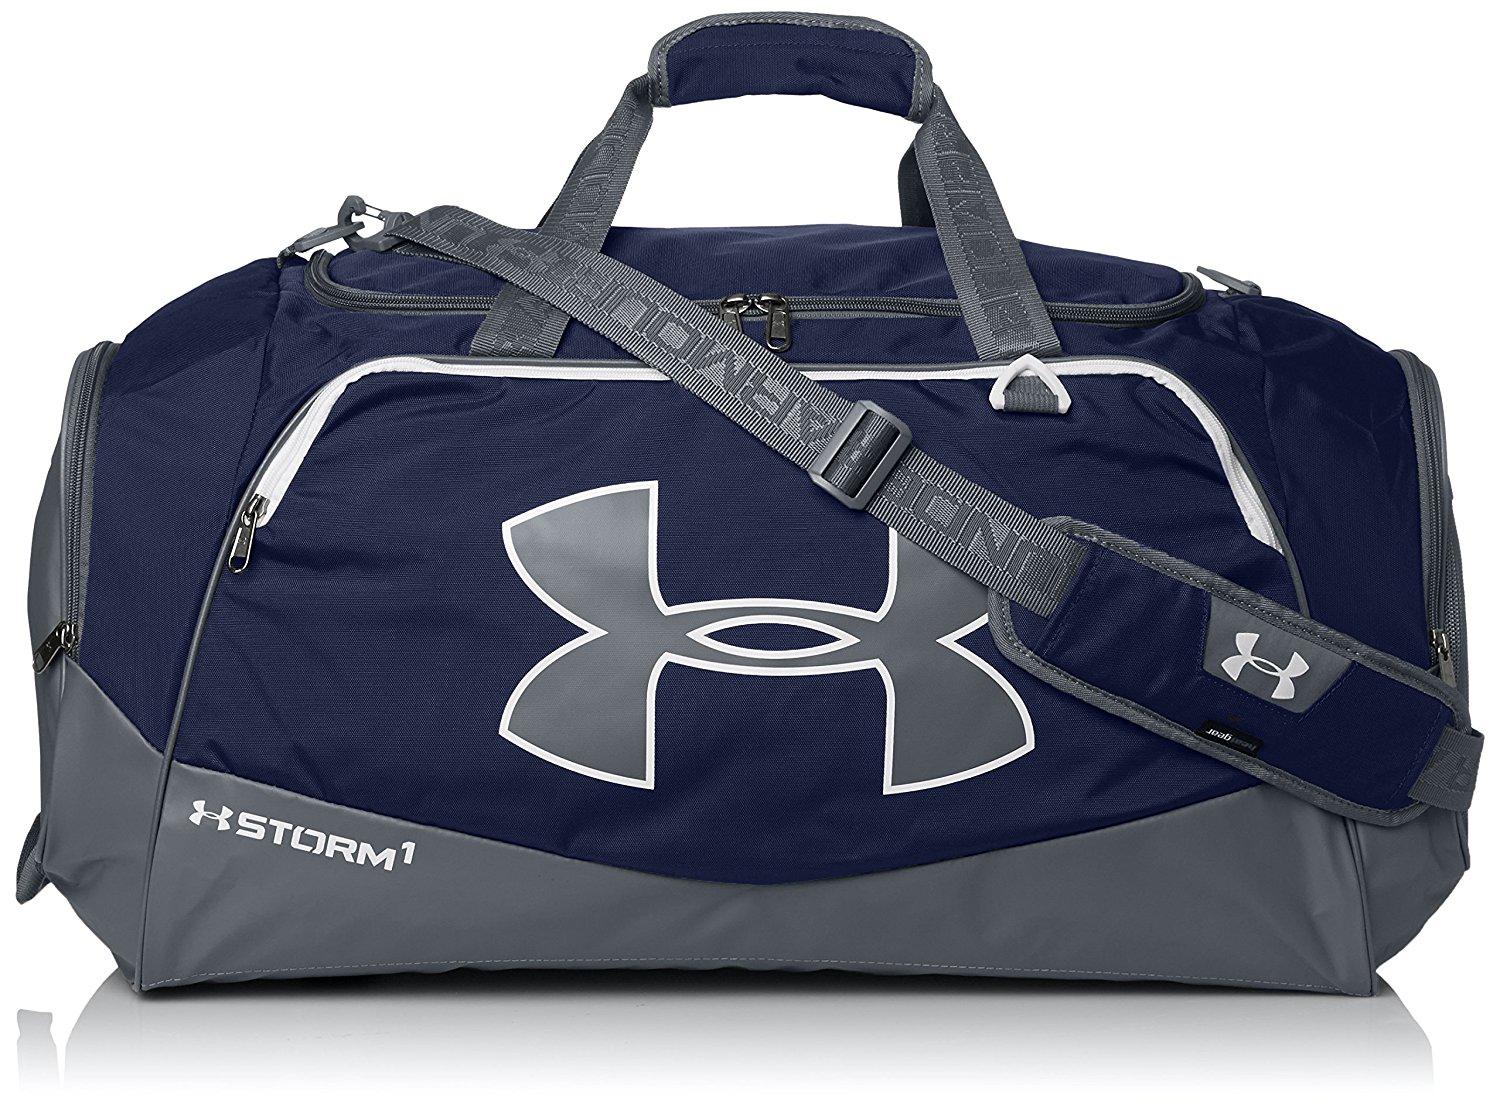 Prime Day Deal – Under Armour Storm Undeniable II Duffle Bag – Just $19.03!